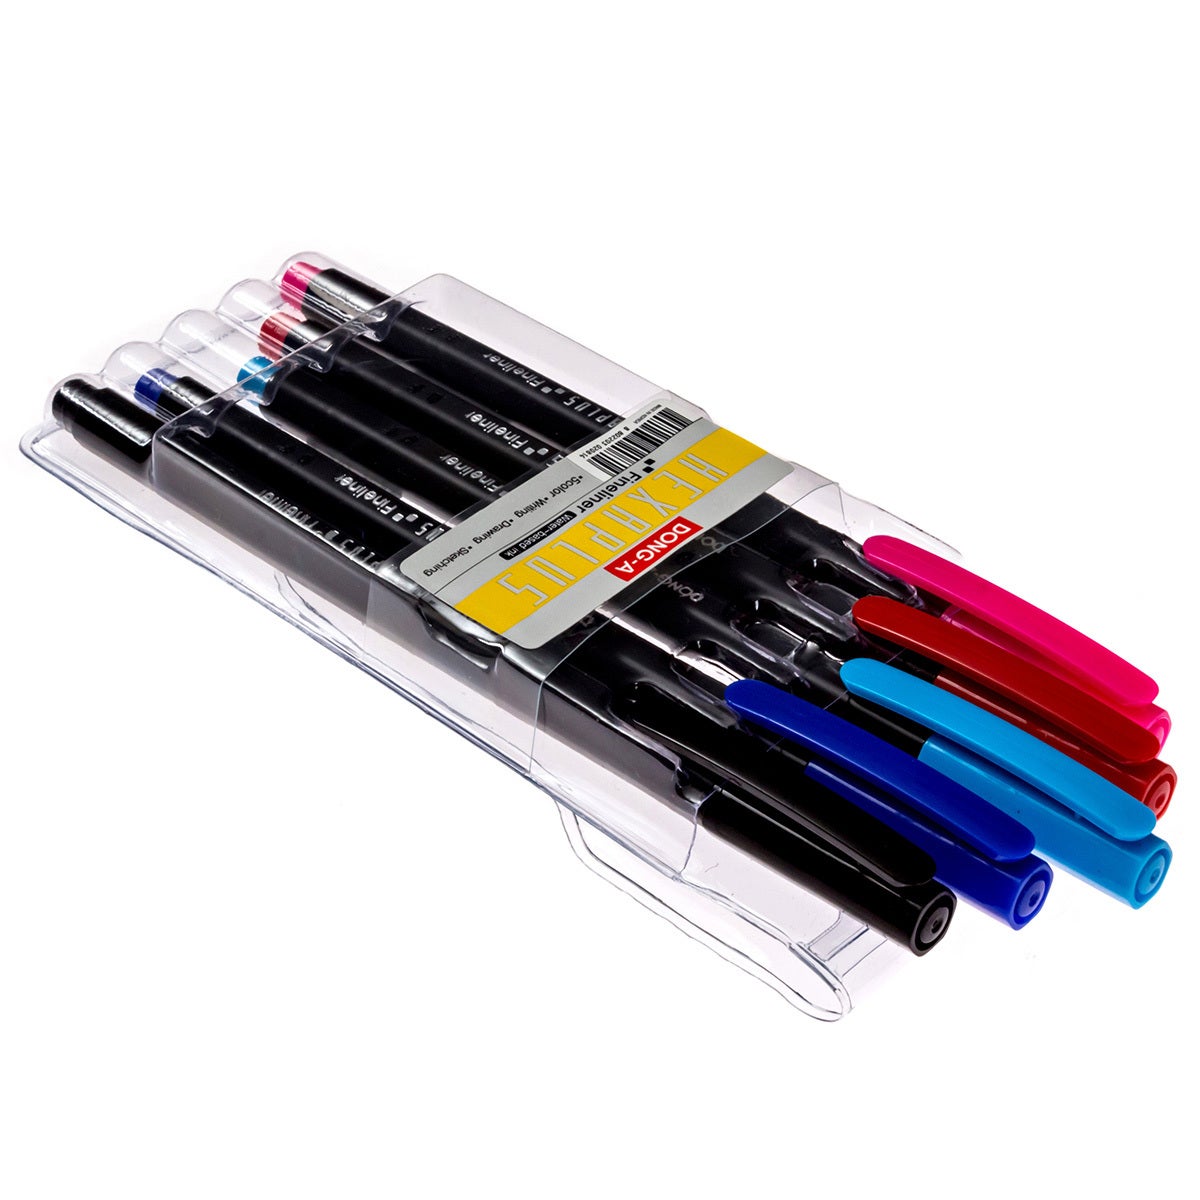 DONG-A Hexaplus Fineliner - 5 Color Set product image 4